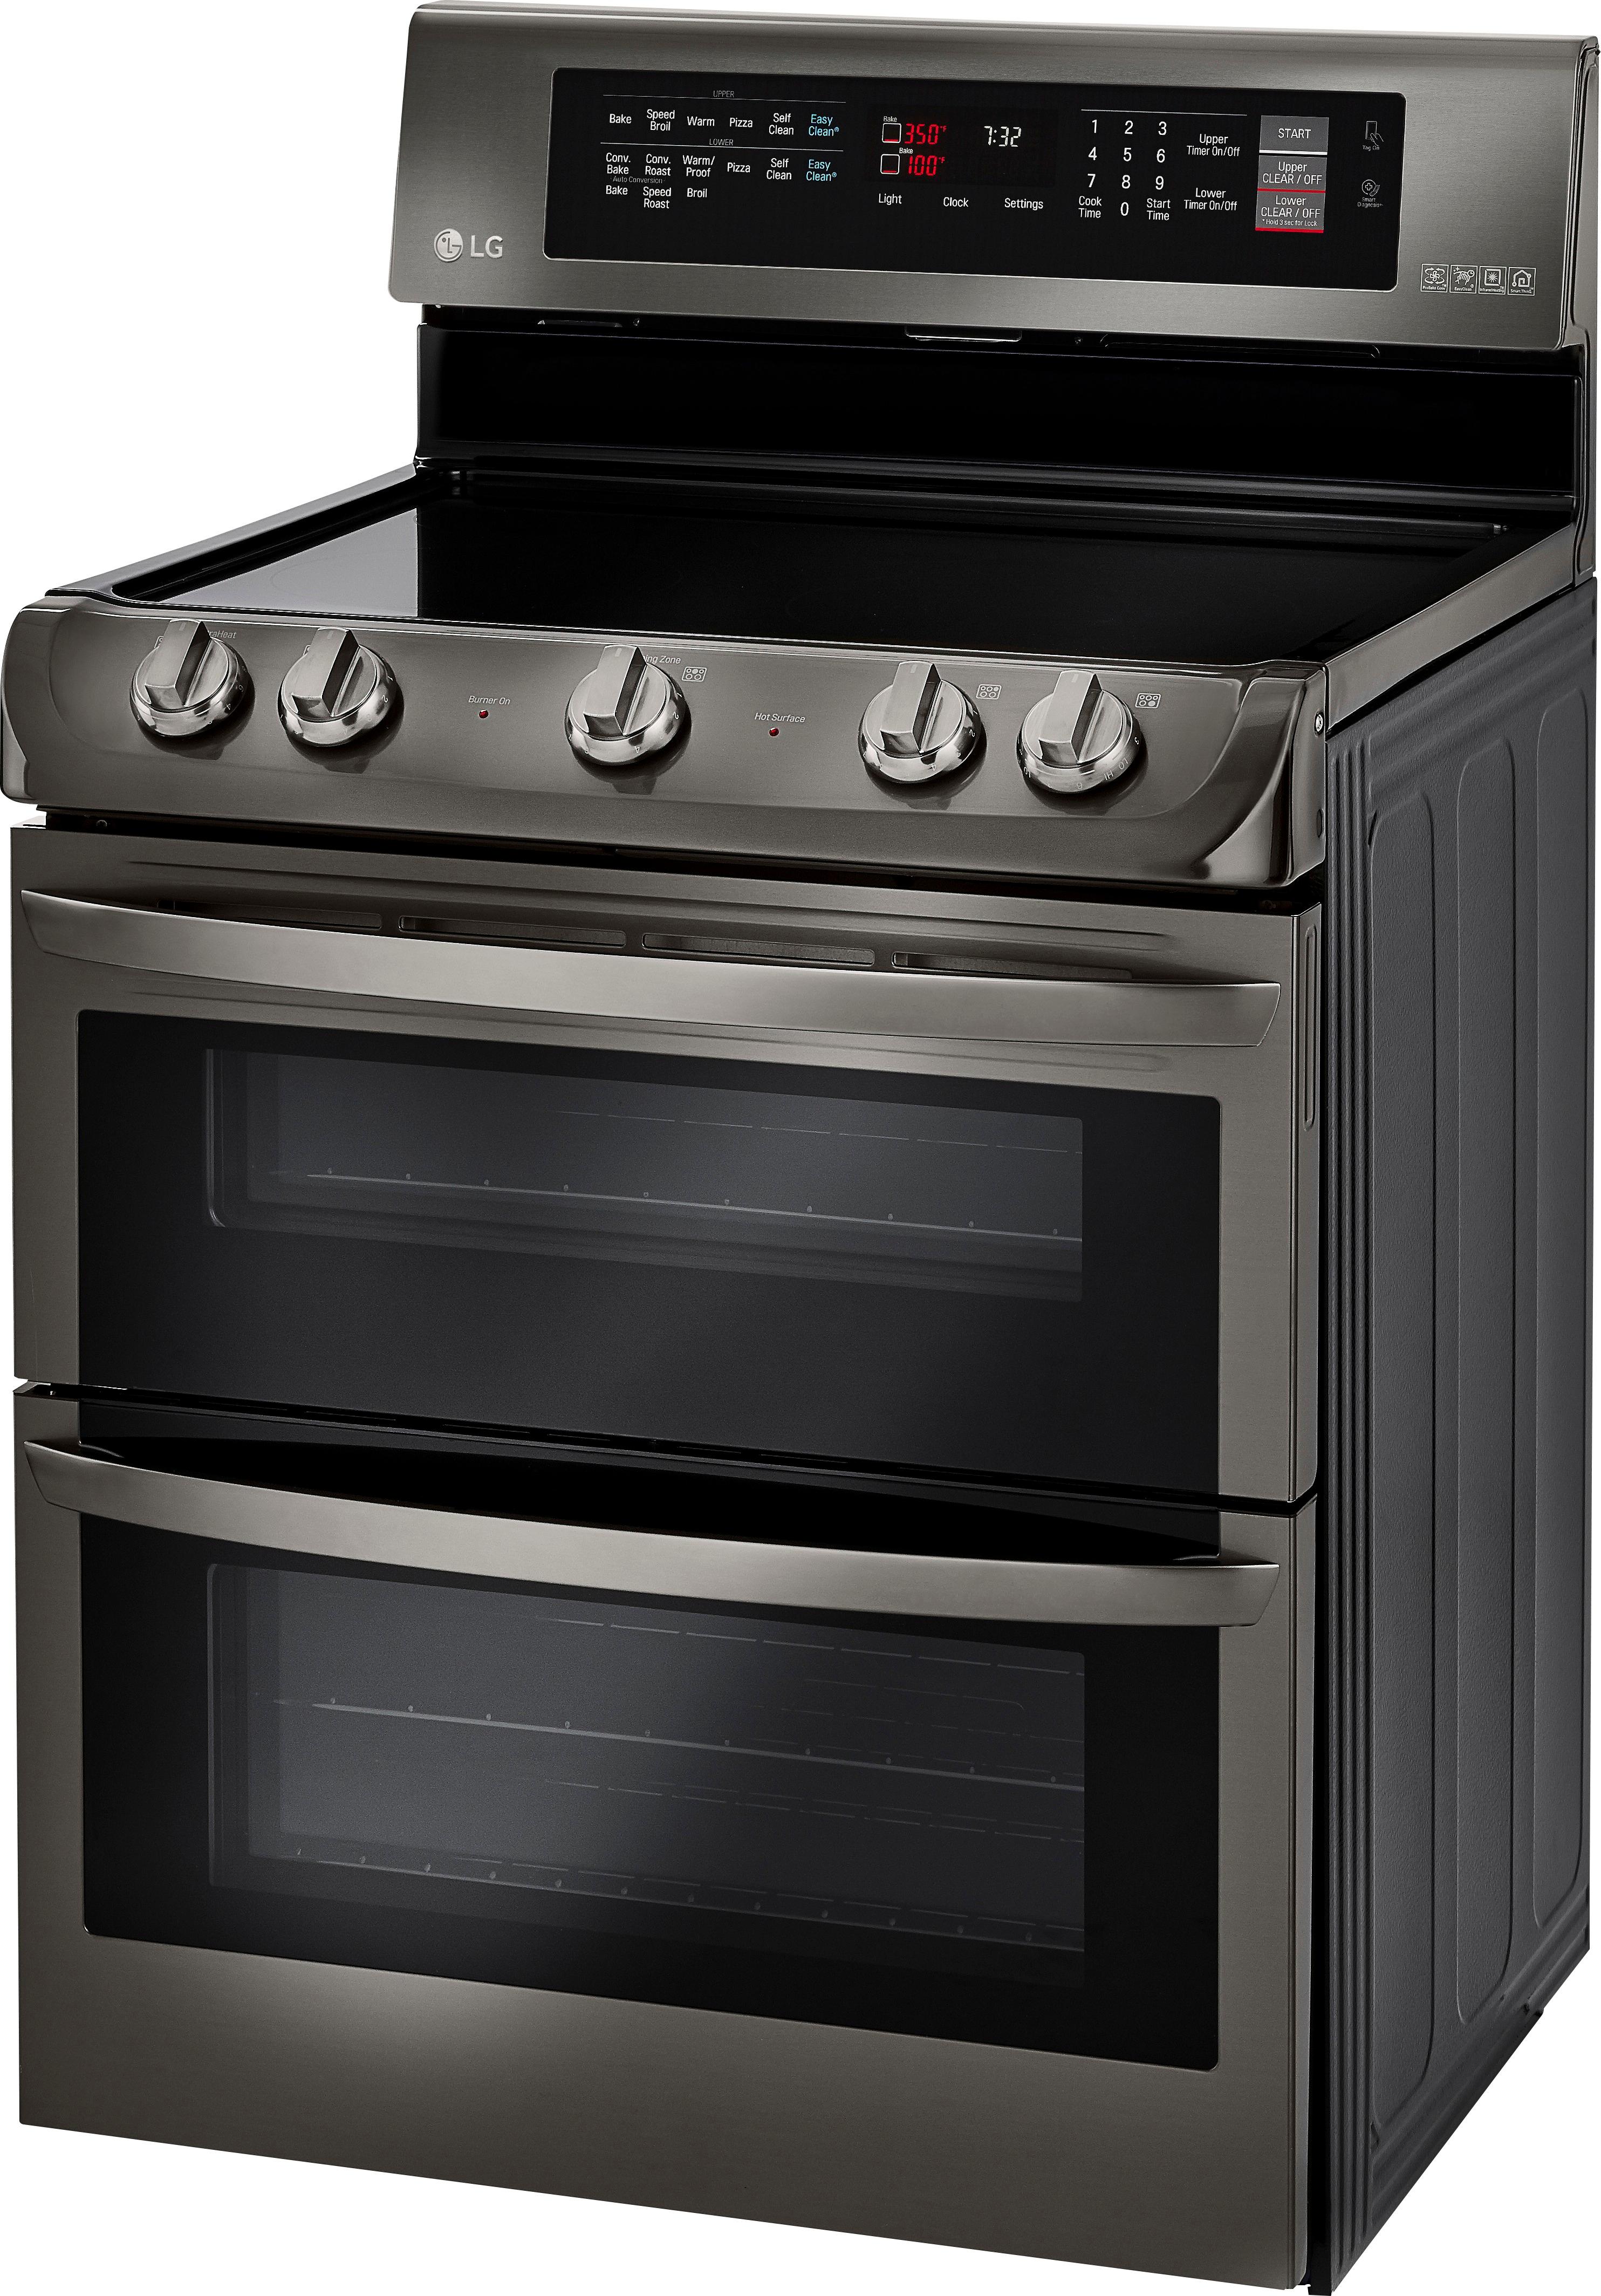 LG 7.3 Cu. Ft. Self-Cleaning Freestanding Double Oven Electric Range Lg Black Stainless Steel Electric Range